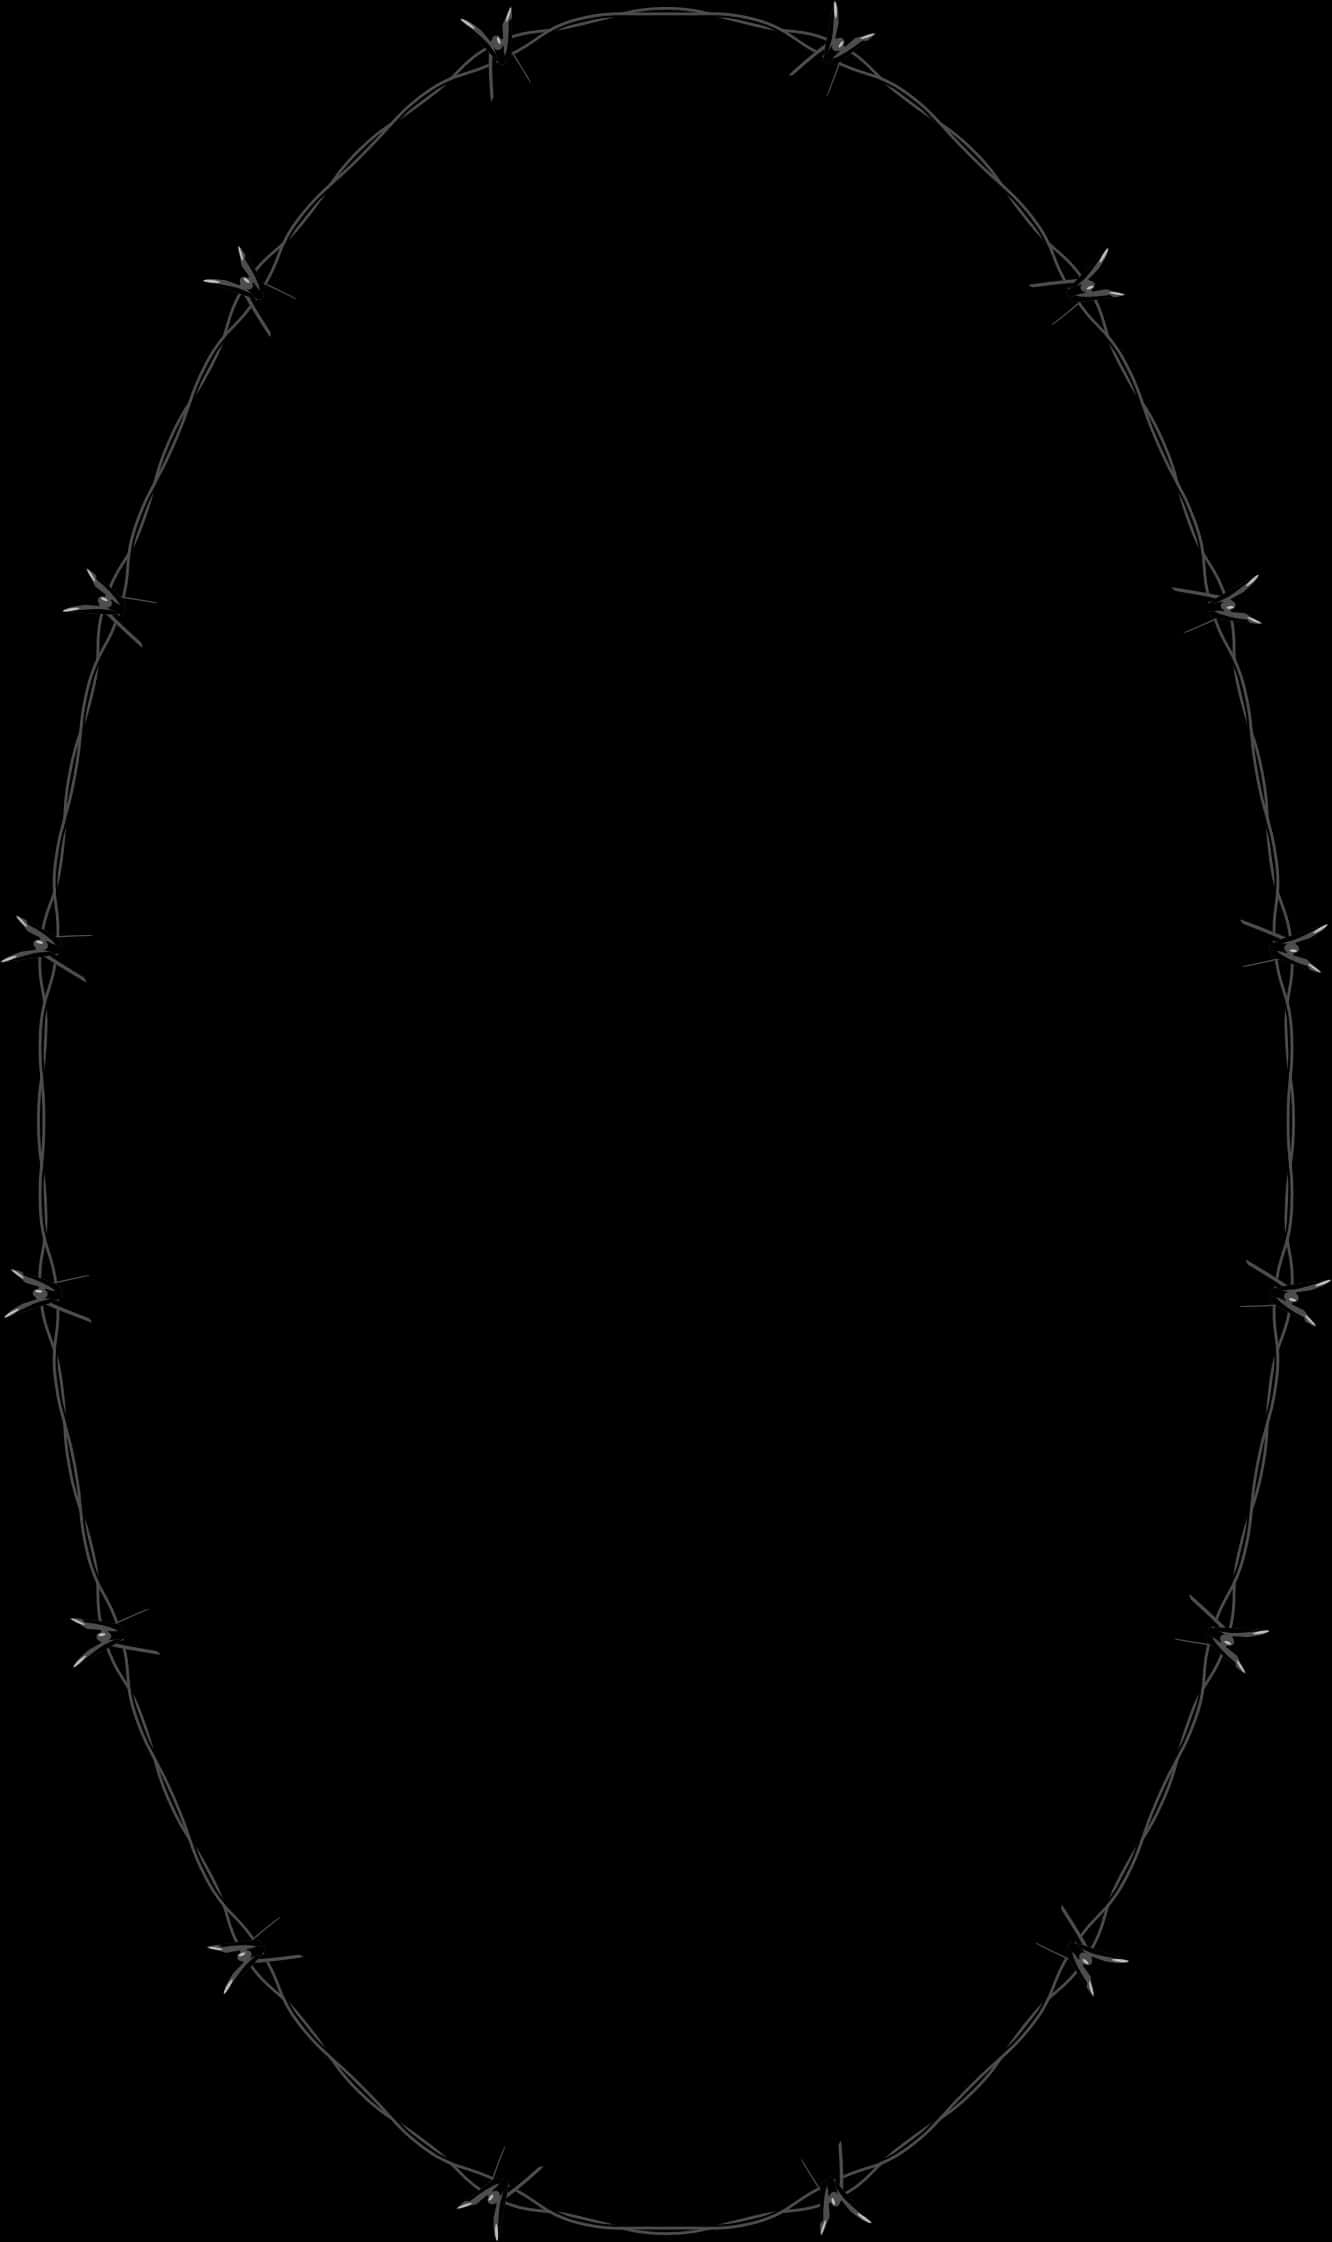 Barbed Wire Oval Frame PNG